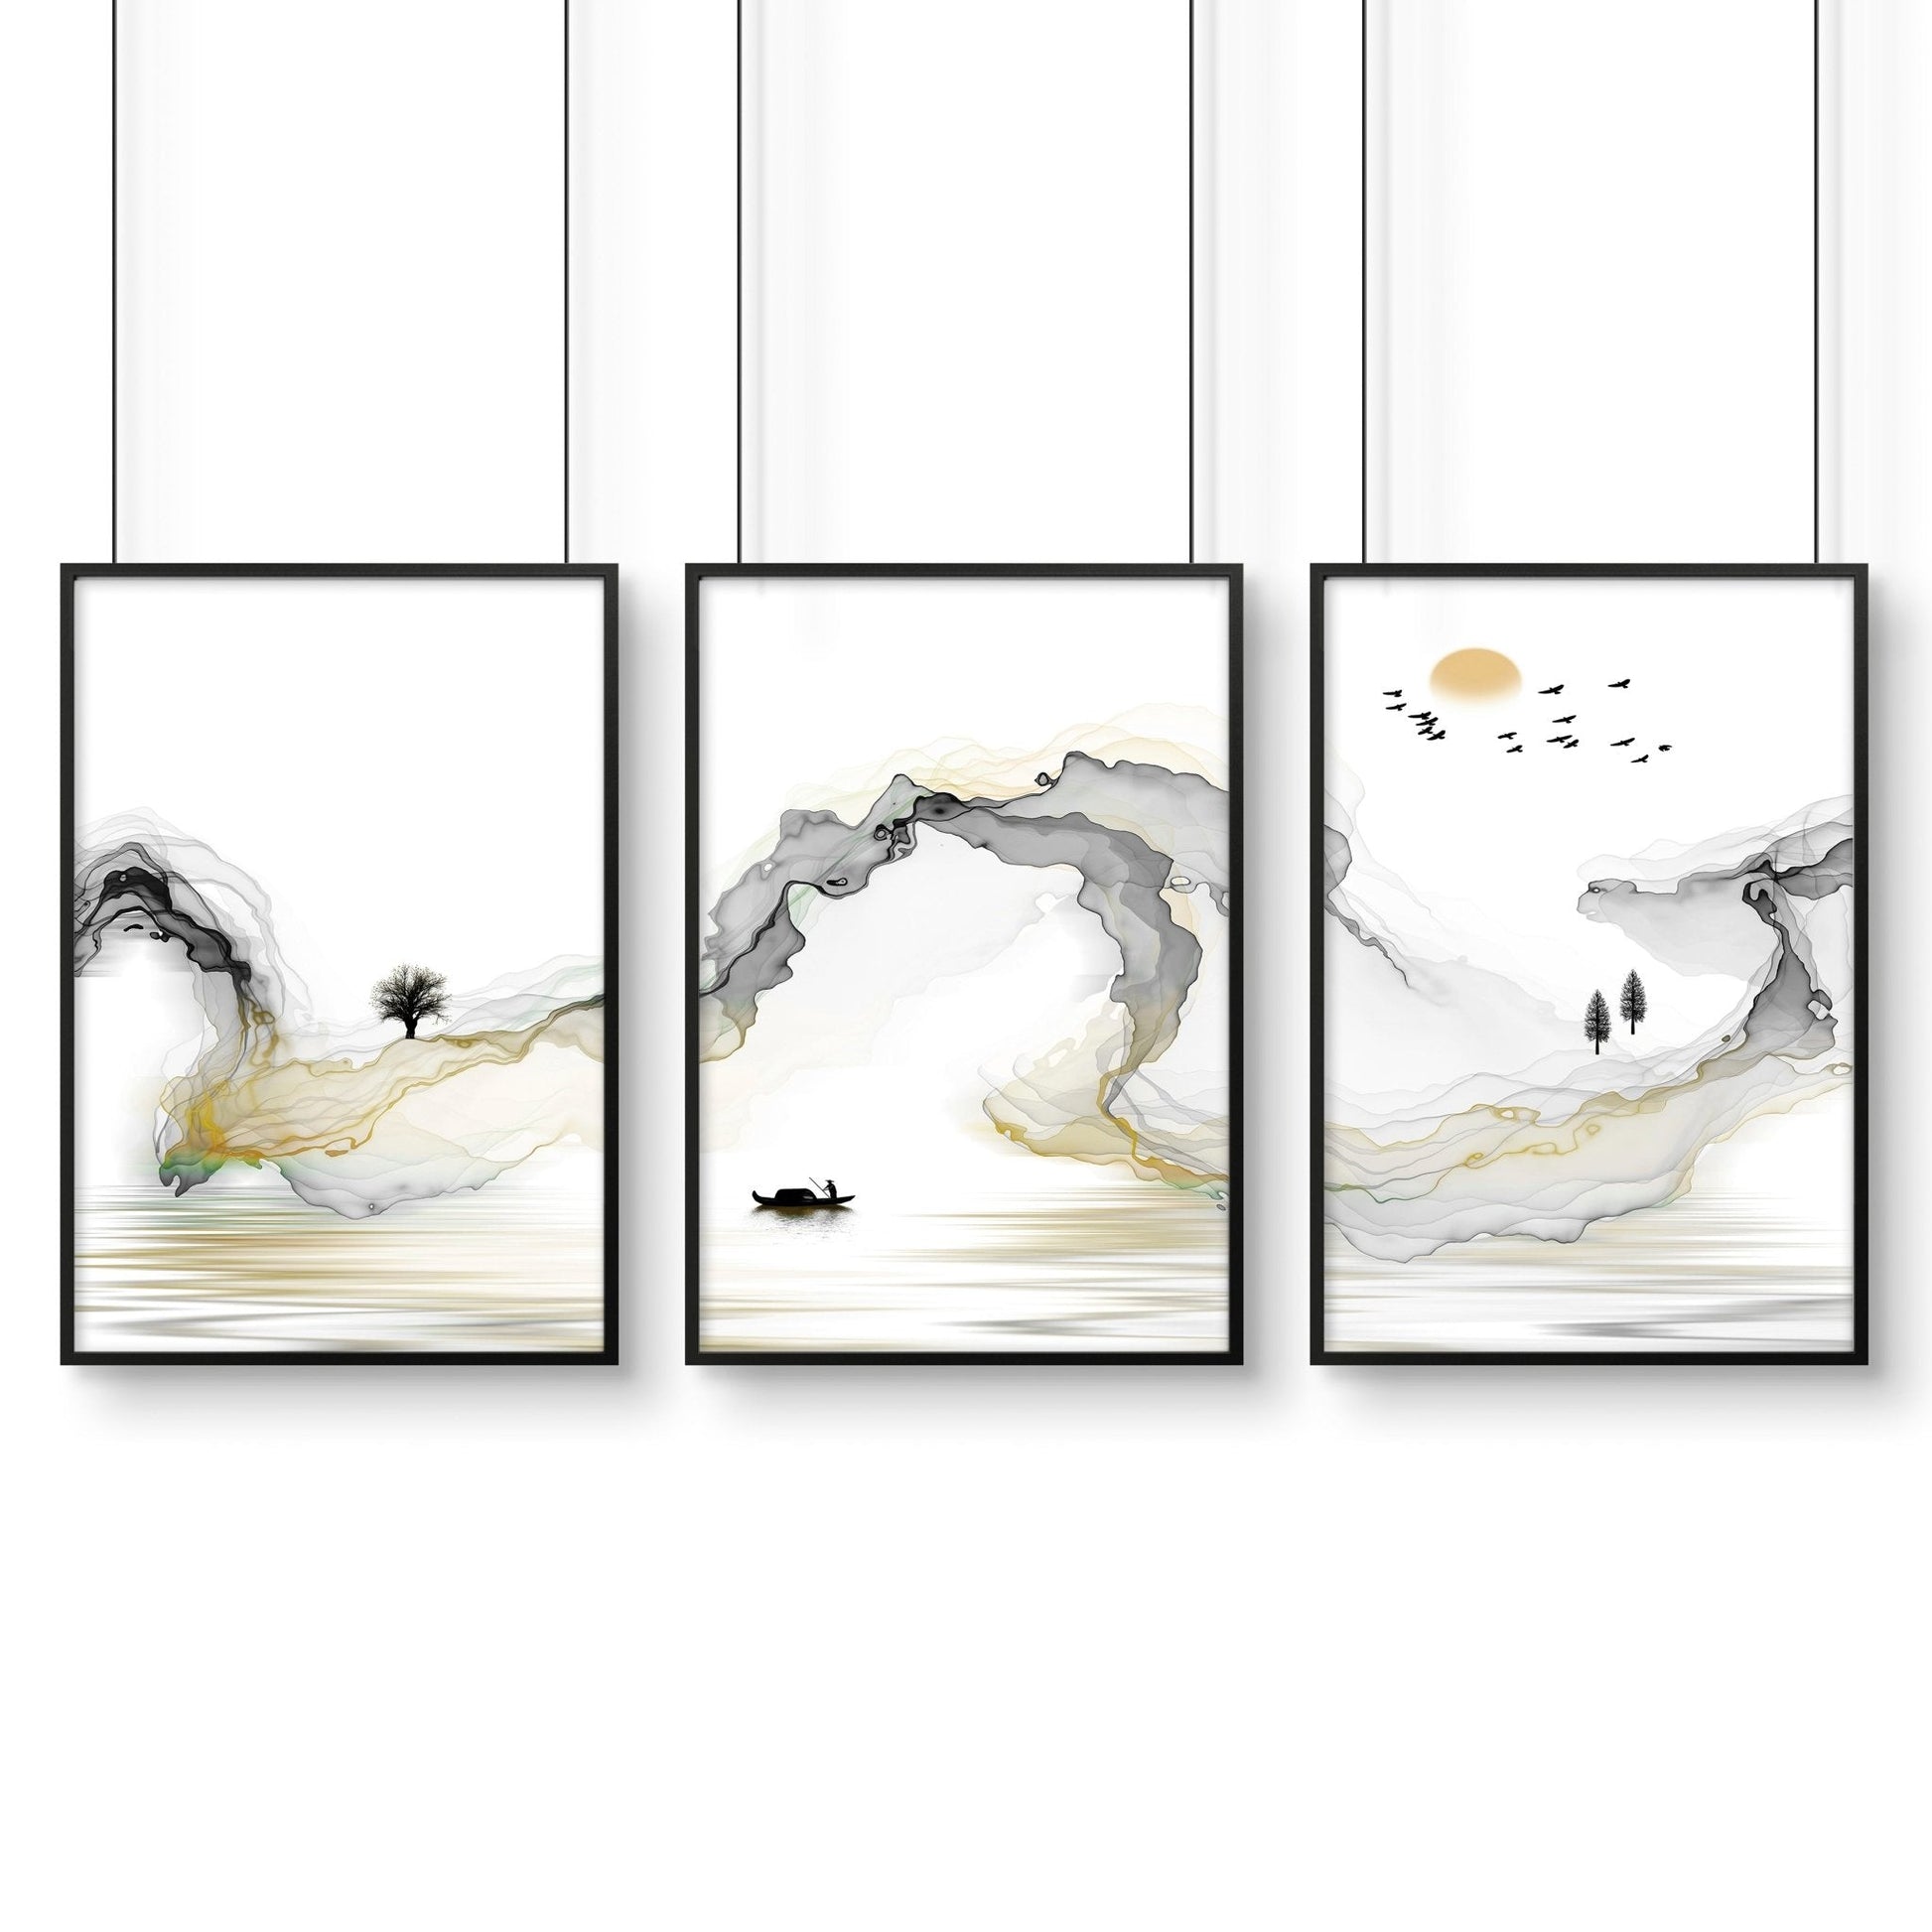 Contemporary asian art - Set of 3 prints - About Wall Art